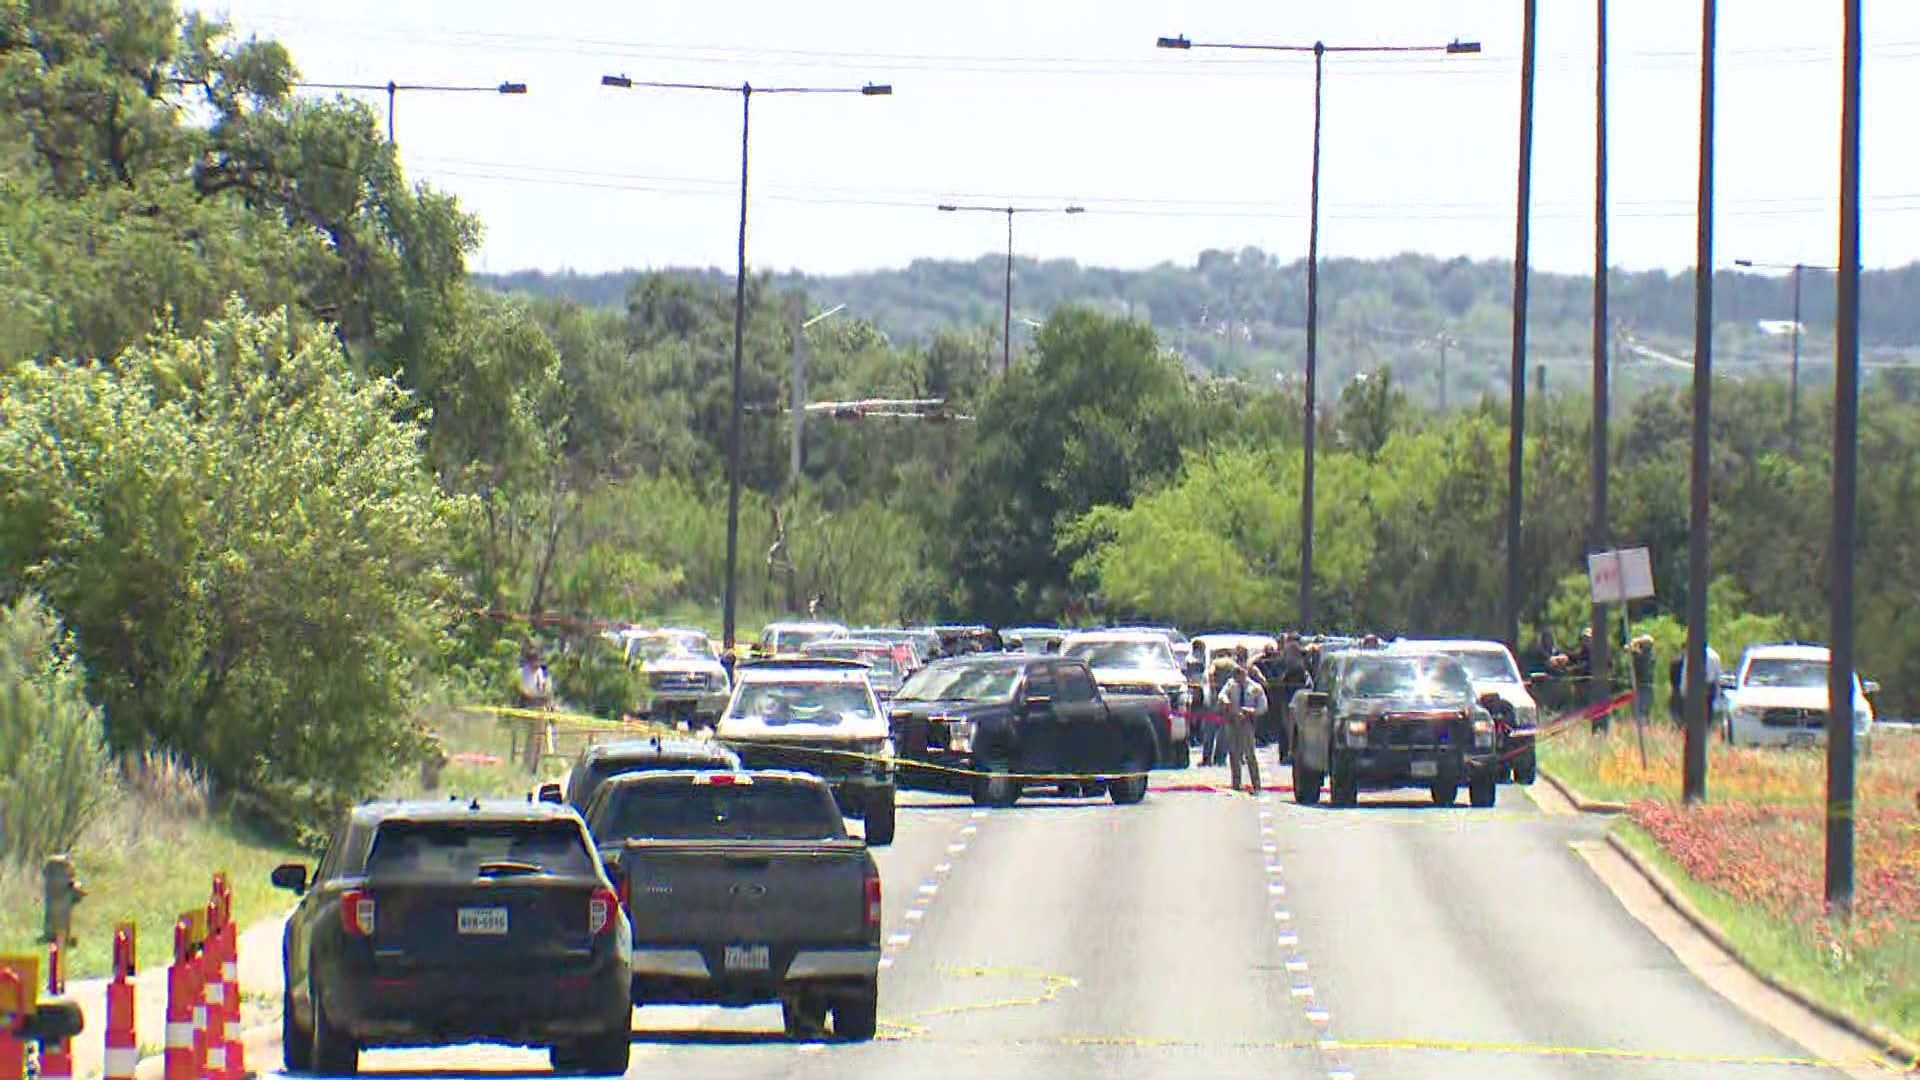 A suspect is dead after multiple members of the Lone Star Fugitive Task Force opened fire while attempting to serve a warrant, sources told KVUE.